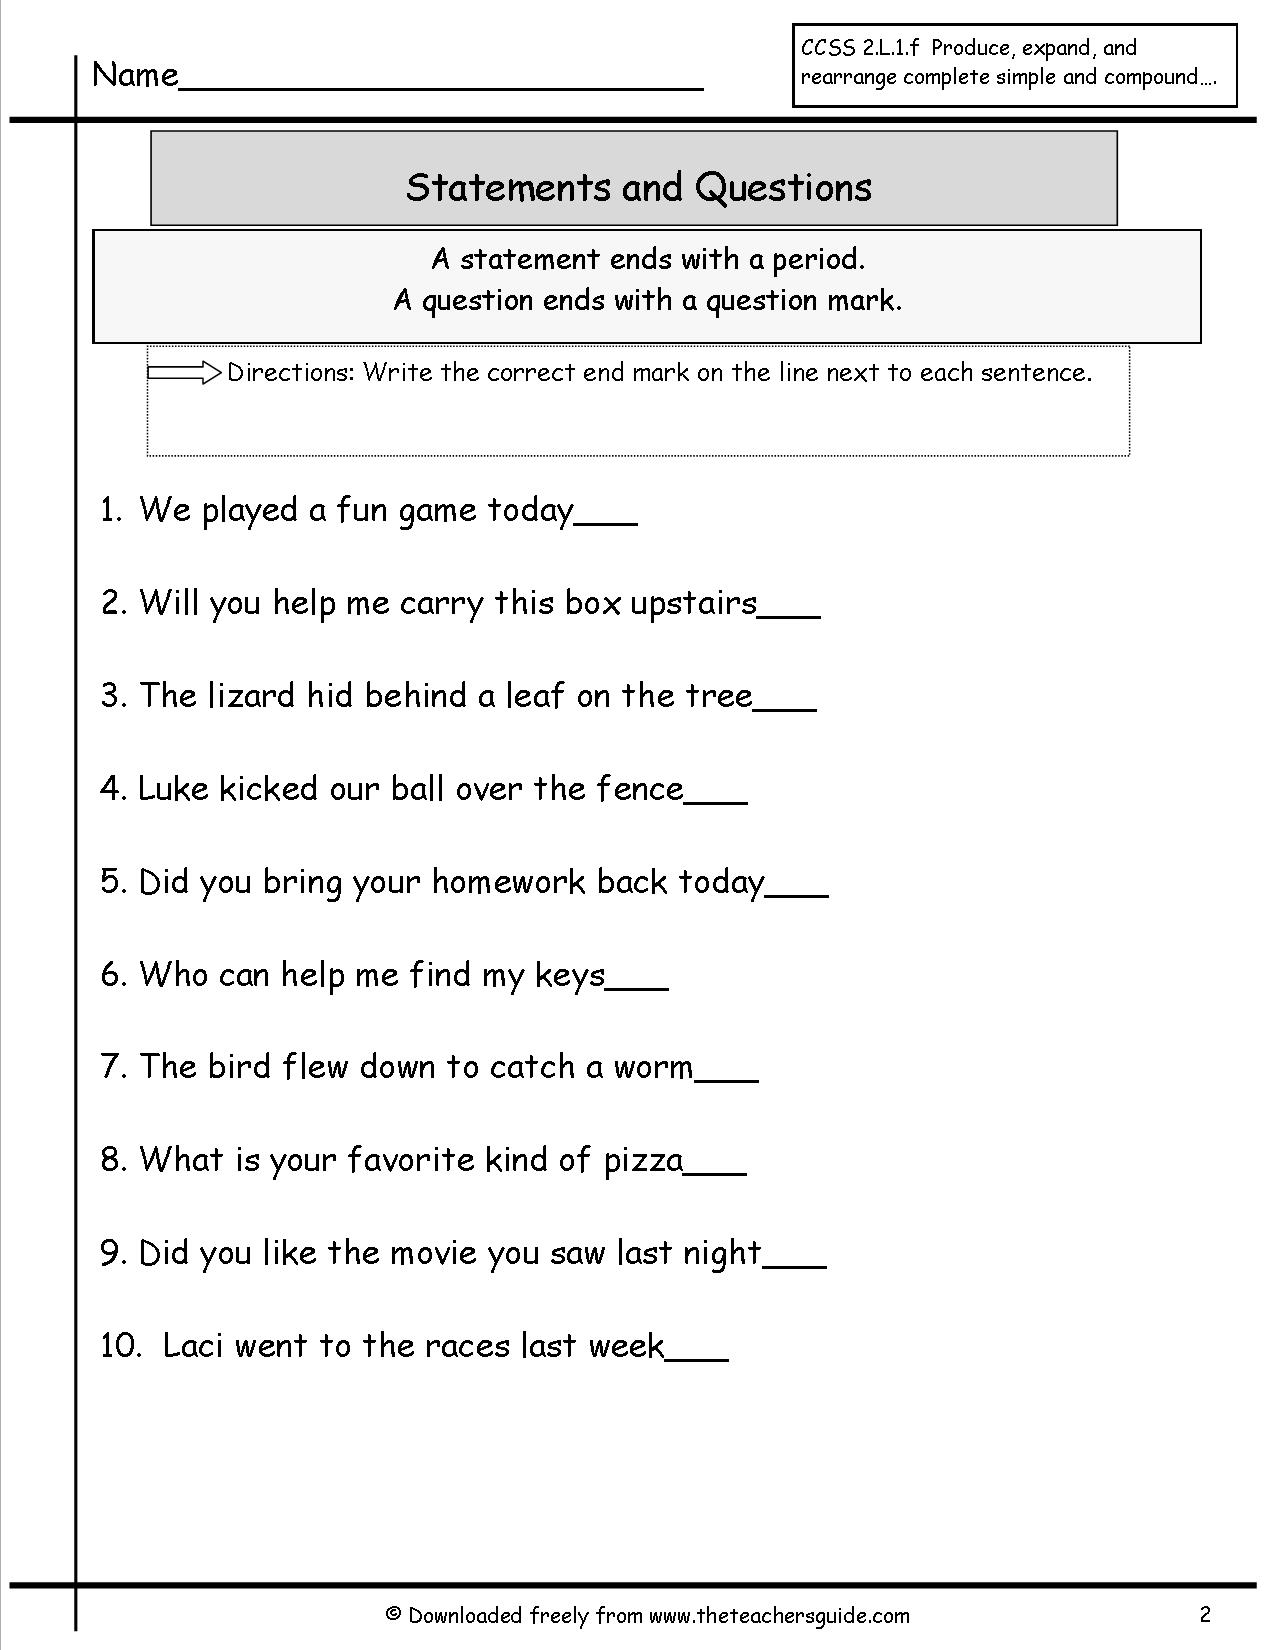 16-best-images-of-create-a-sentence-worksheets-printable-sentence